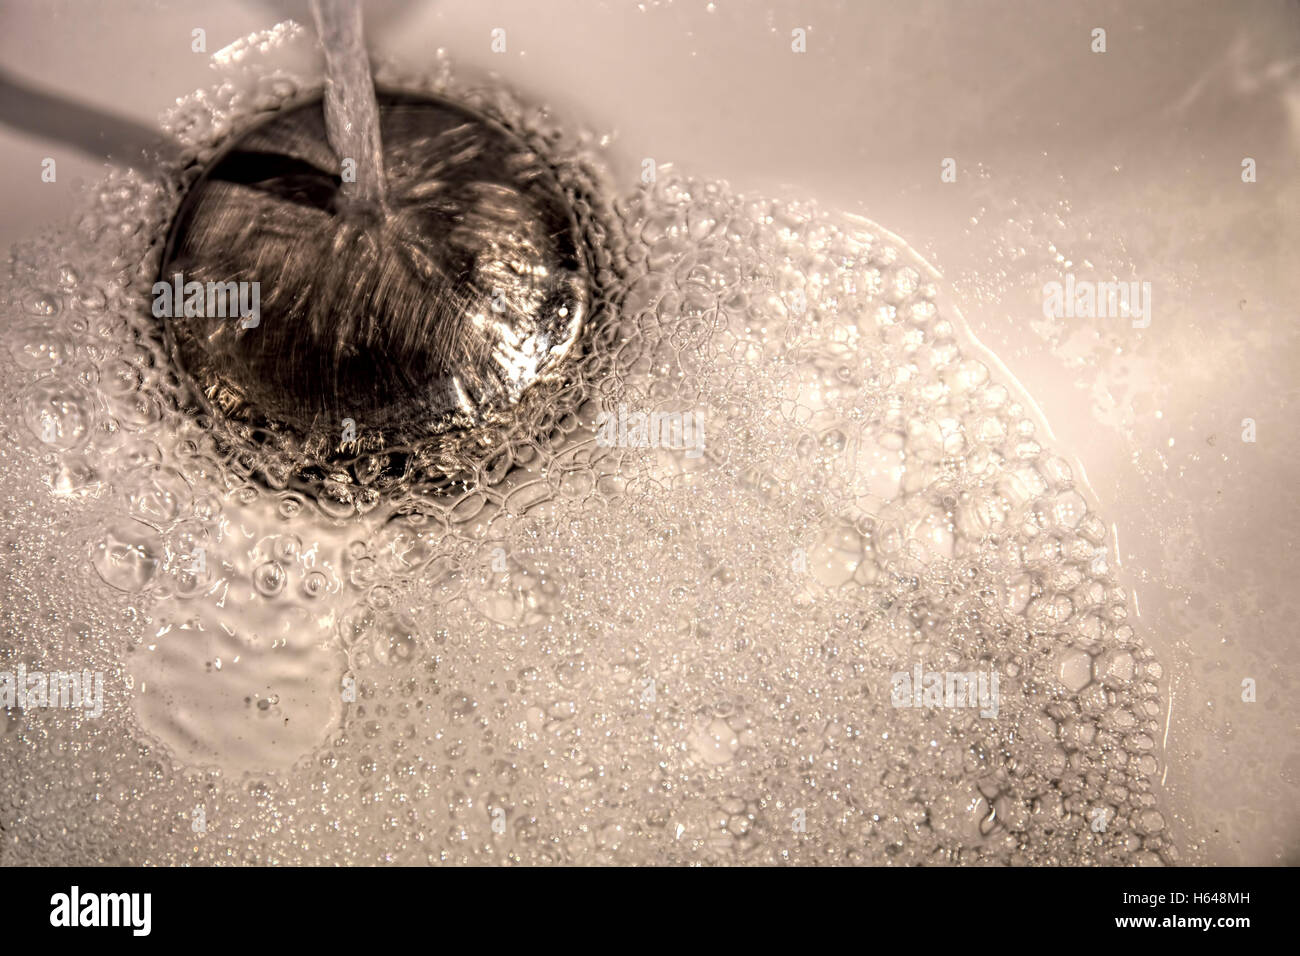 Running water pours into a wash basin with modern stainless steel sink plug fitting Stock Photo